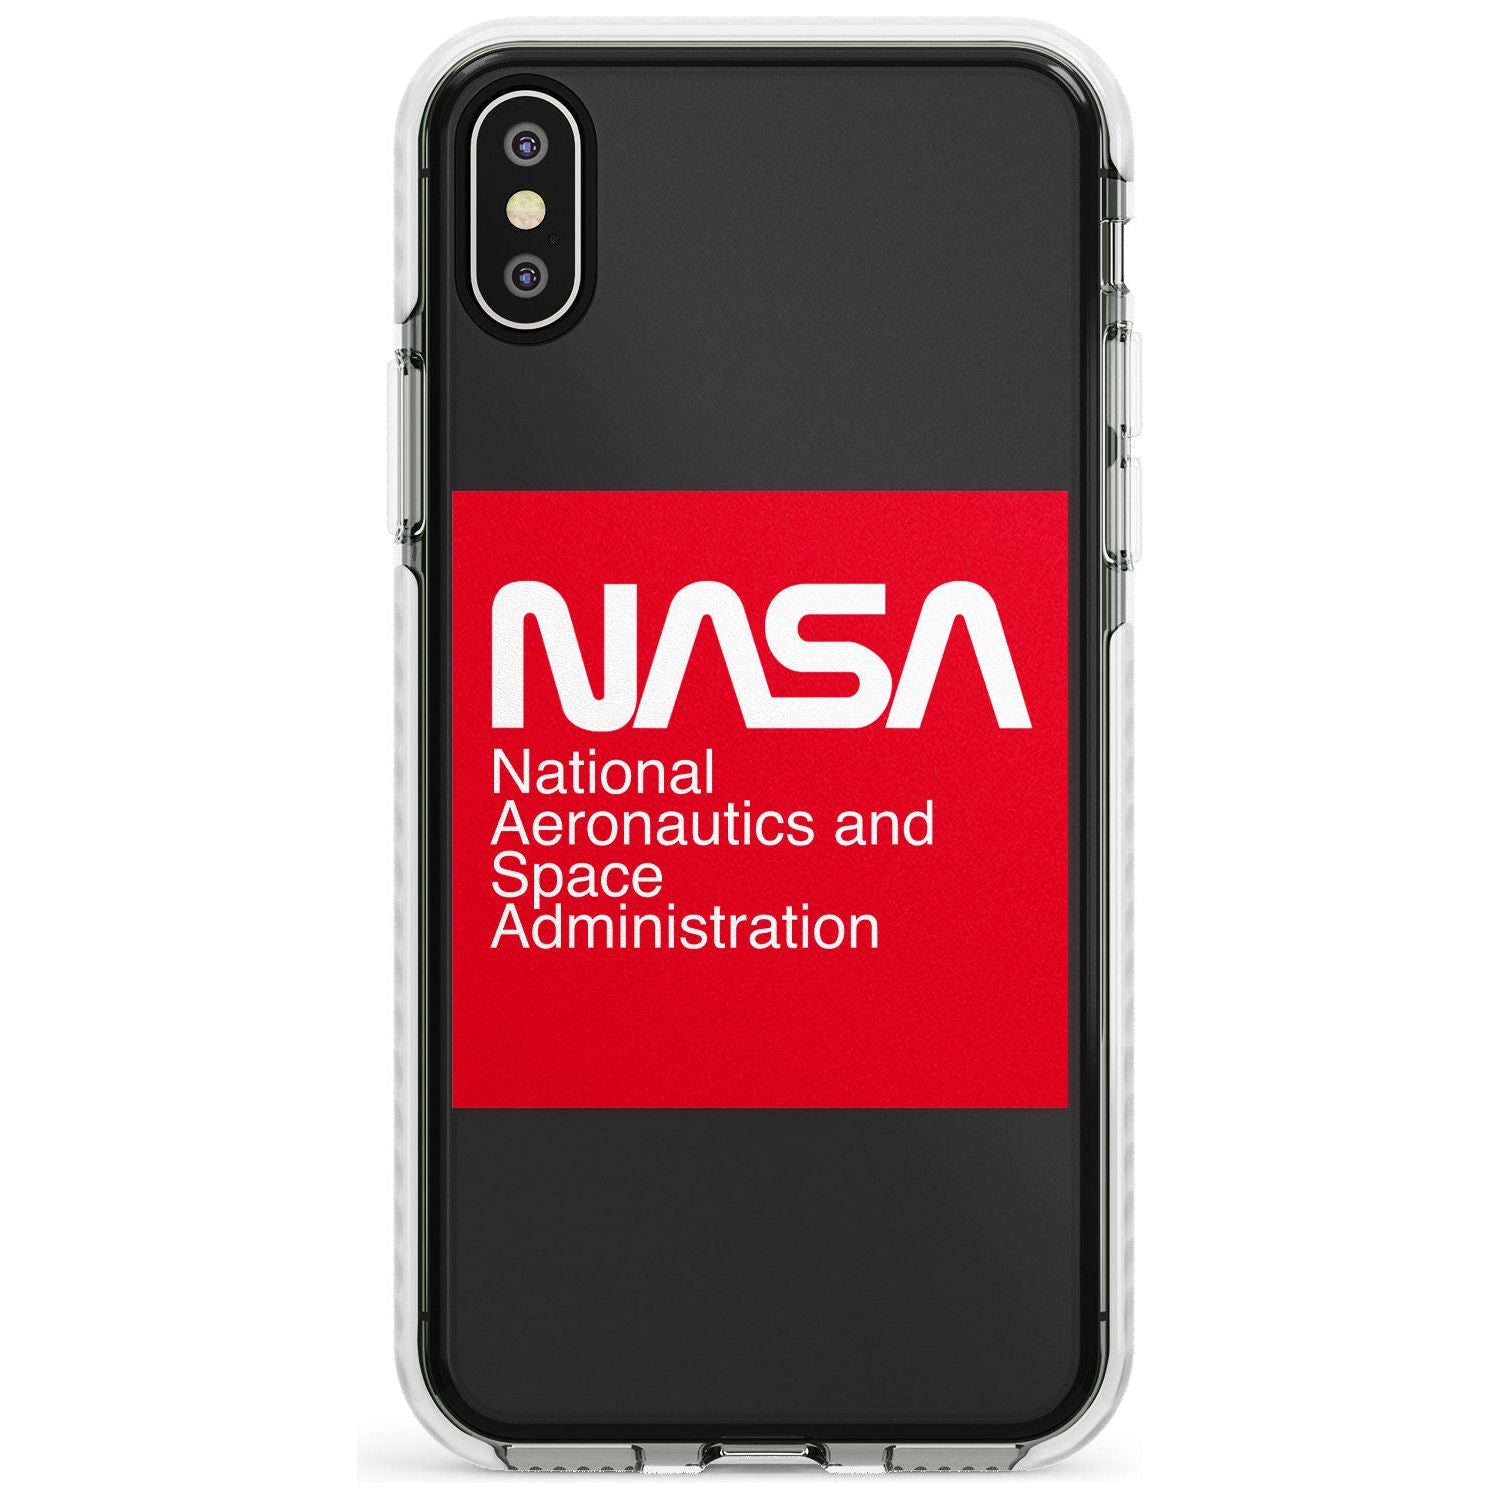 NASA The Worm Box Impact Phone Case for iPhone X XS Max XR